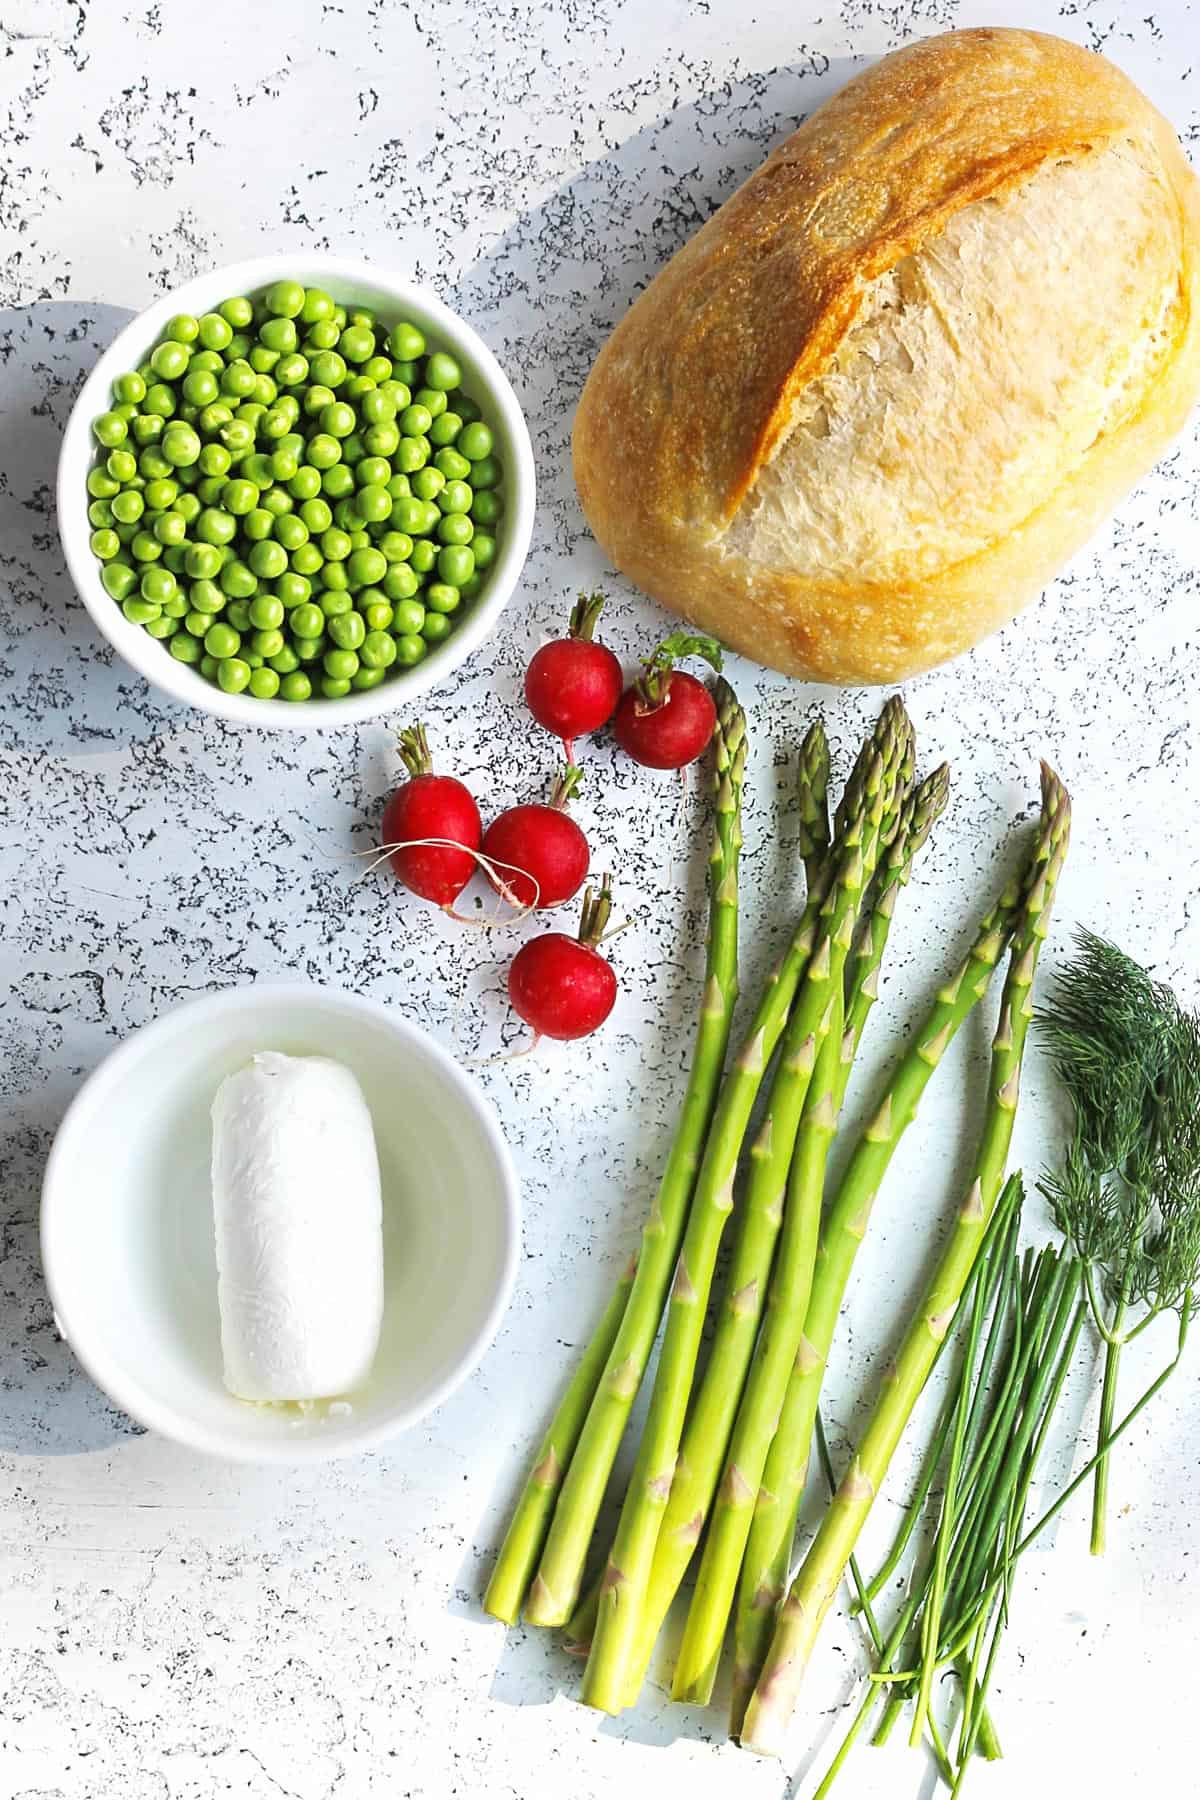 Ingredients for spring toast with veggies